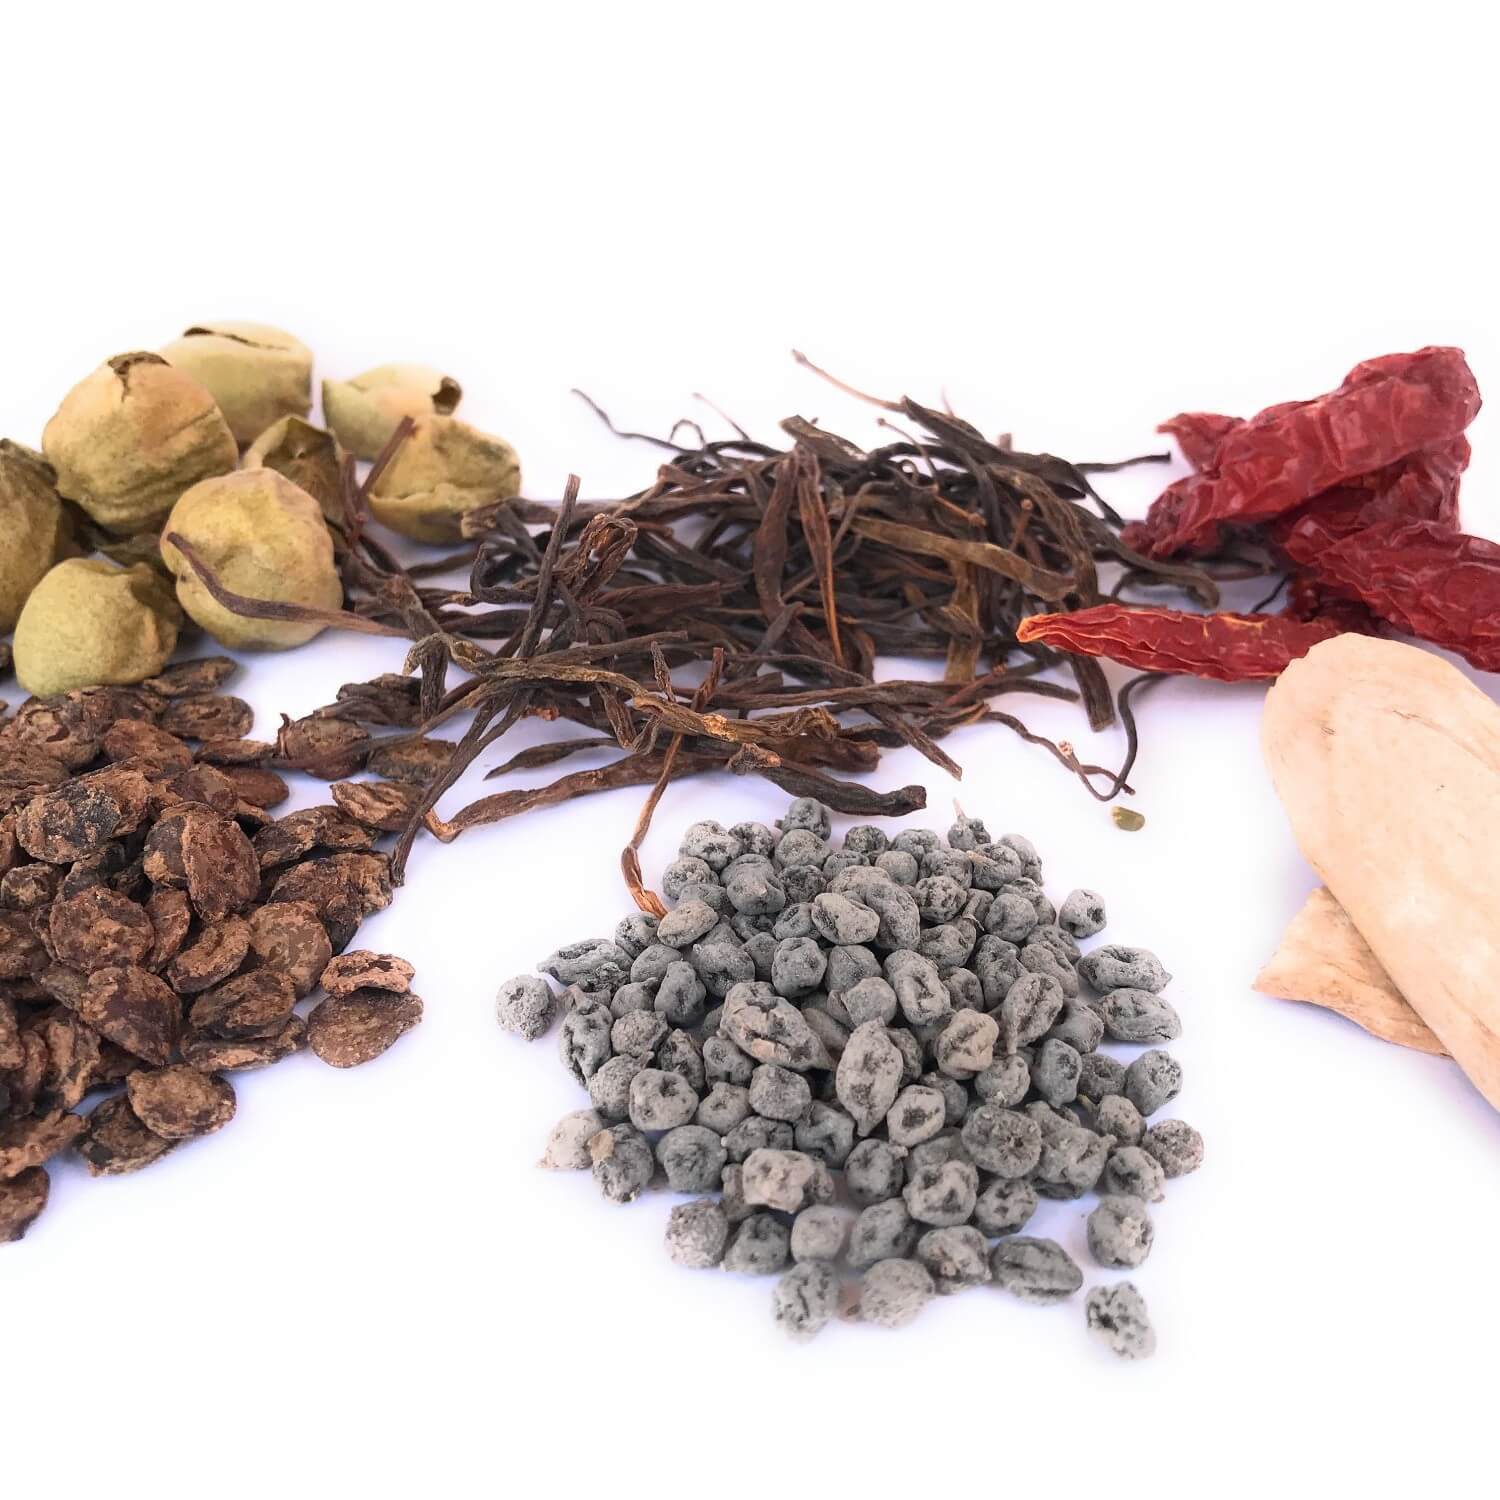 Sun-Kissed Superfoods: The Nutrient-Rich Dried Vegetables of Rajasthan